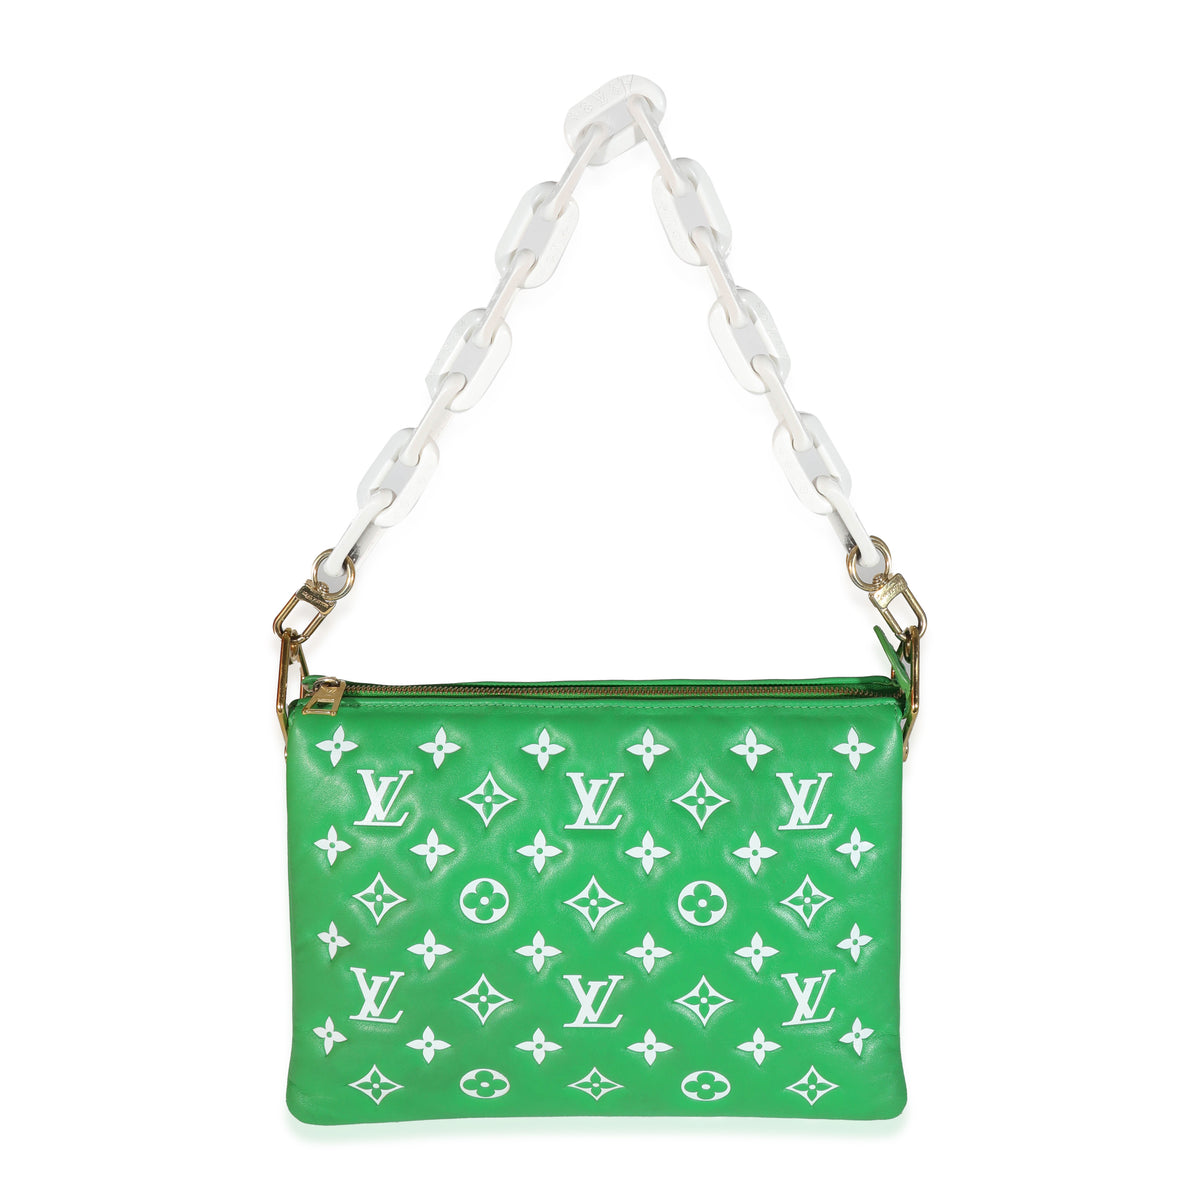 Louis Vuitton - Authenticated Coussin Handbag - Leather Green for Women, Very Good Condition